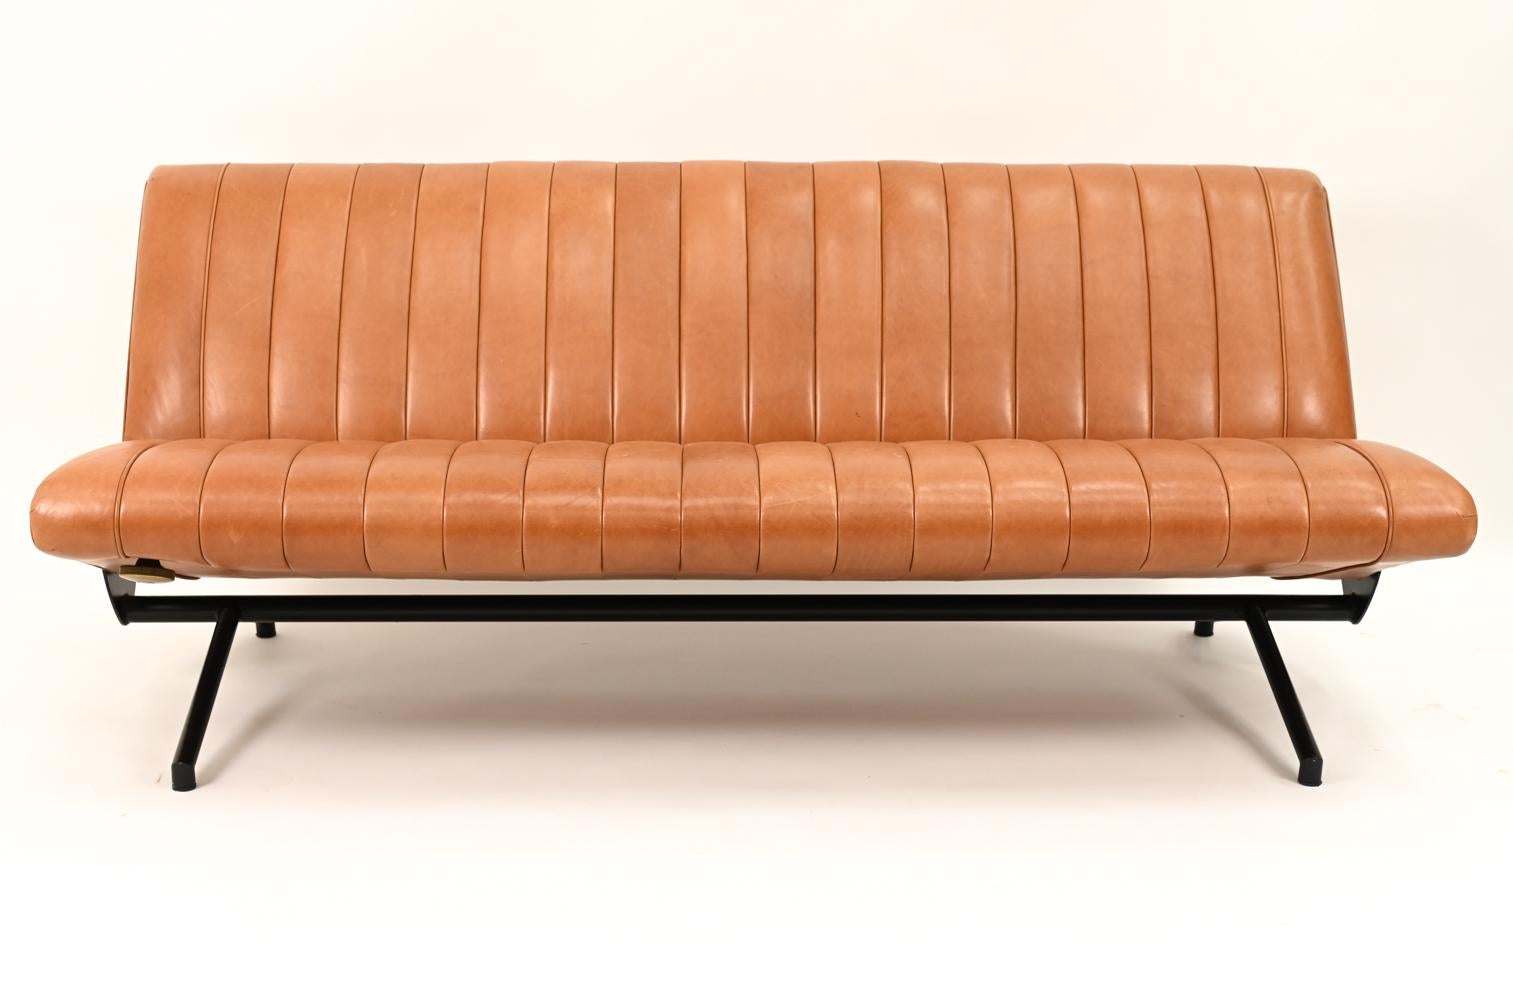 An iconic example of Italian mid-century design, continually reproduced for its highly renowned marriage of style and functionality, this fully adjustable reclining sofa-to-daybed was designed by Osvaldo Borsani for Tecno in 1995. The model D70 sofa